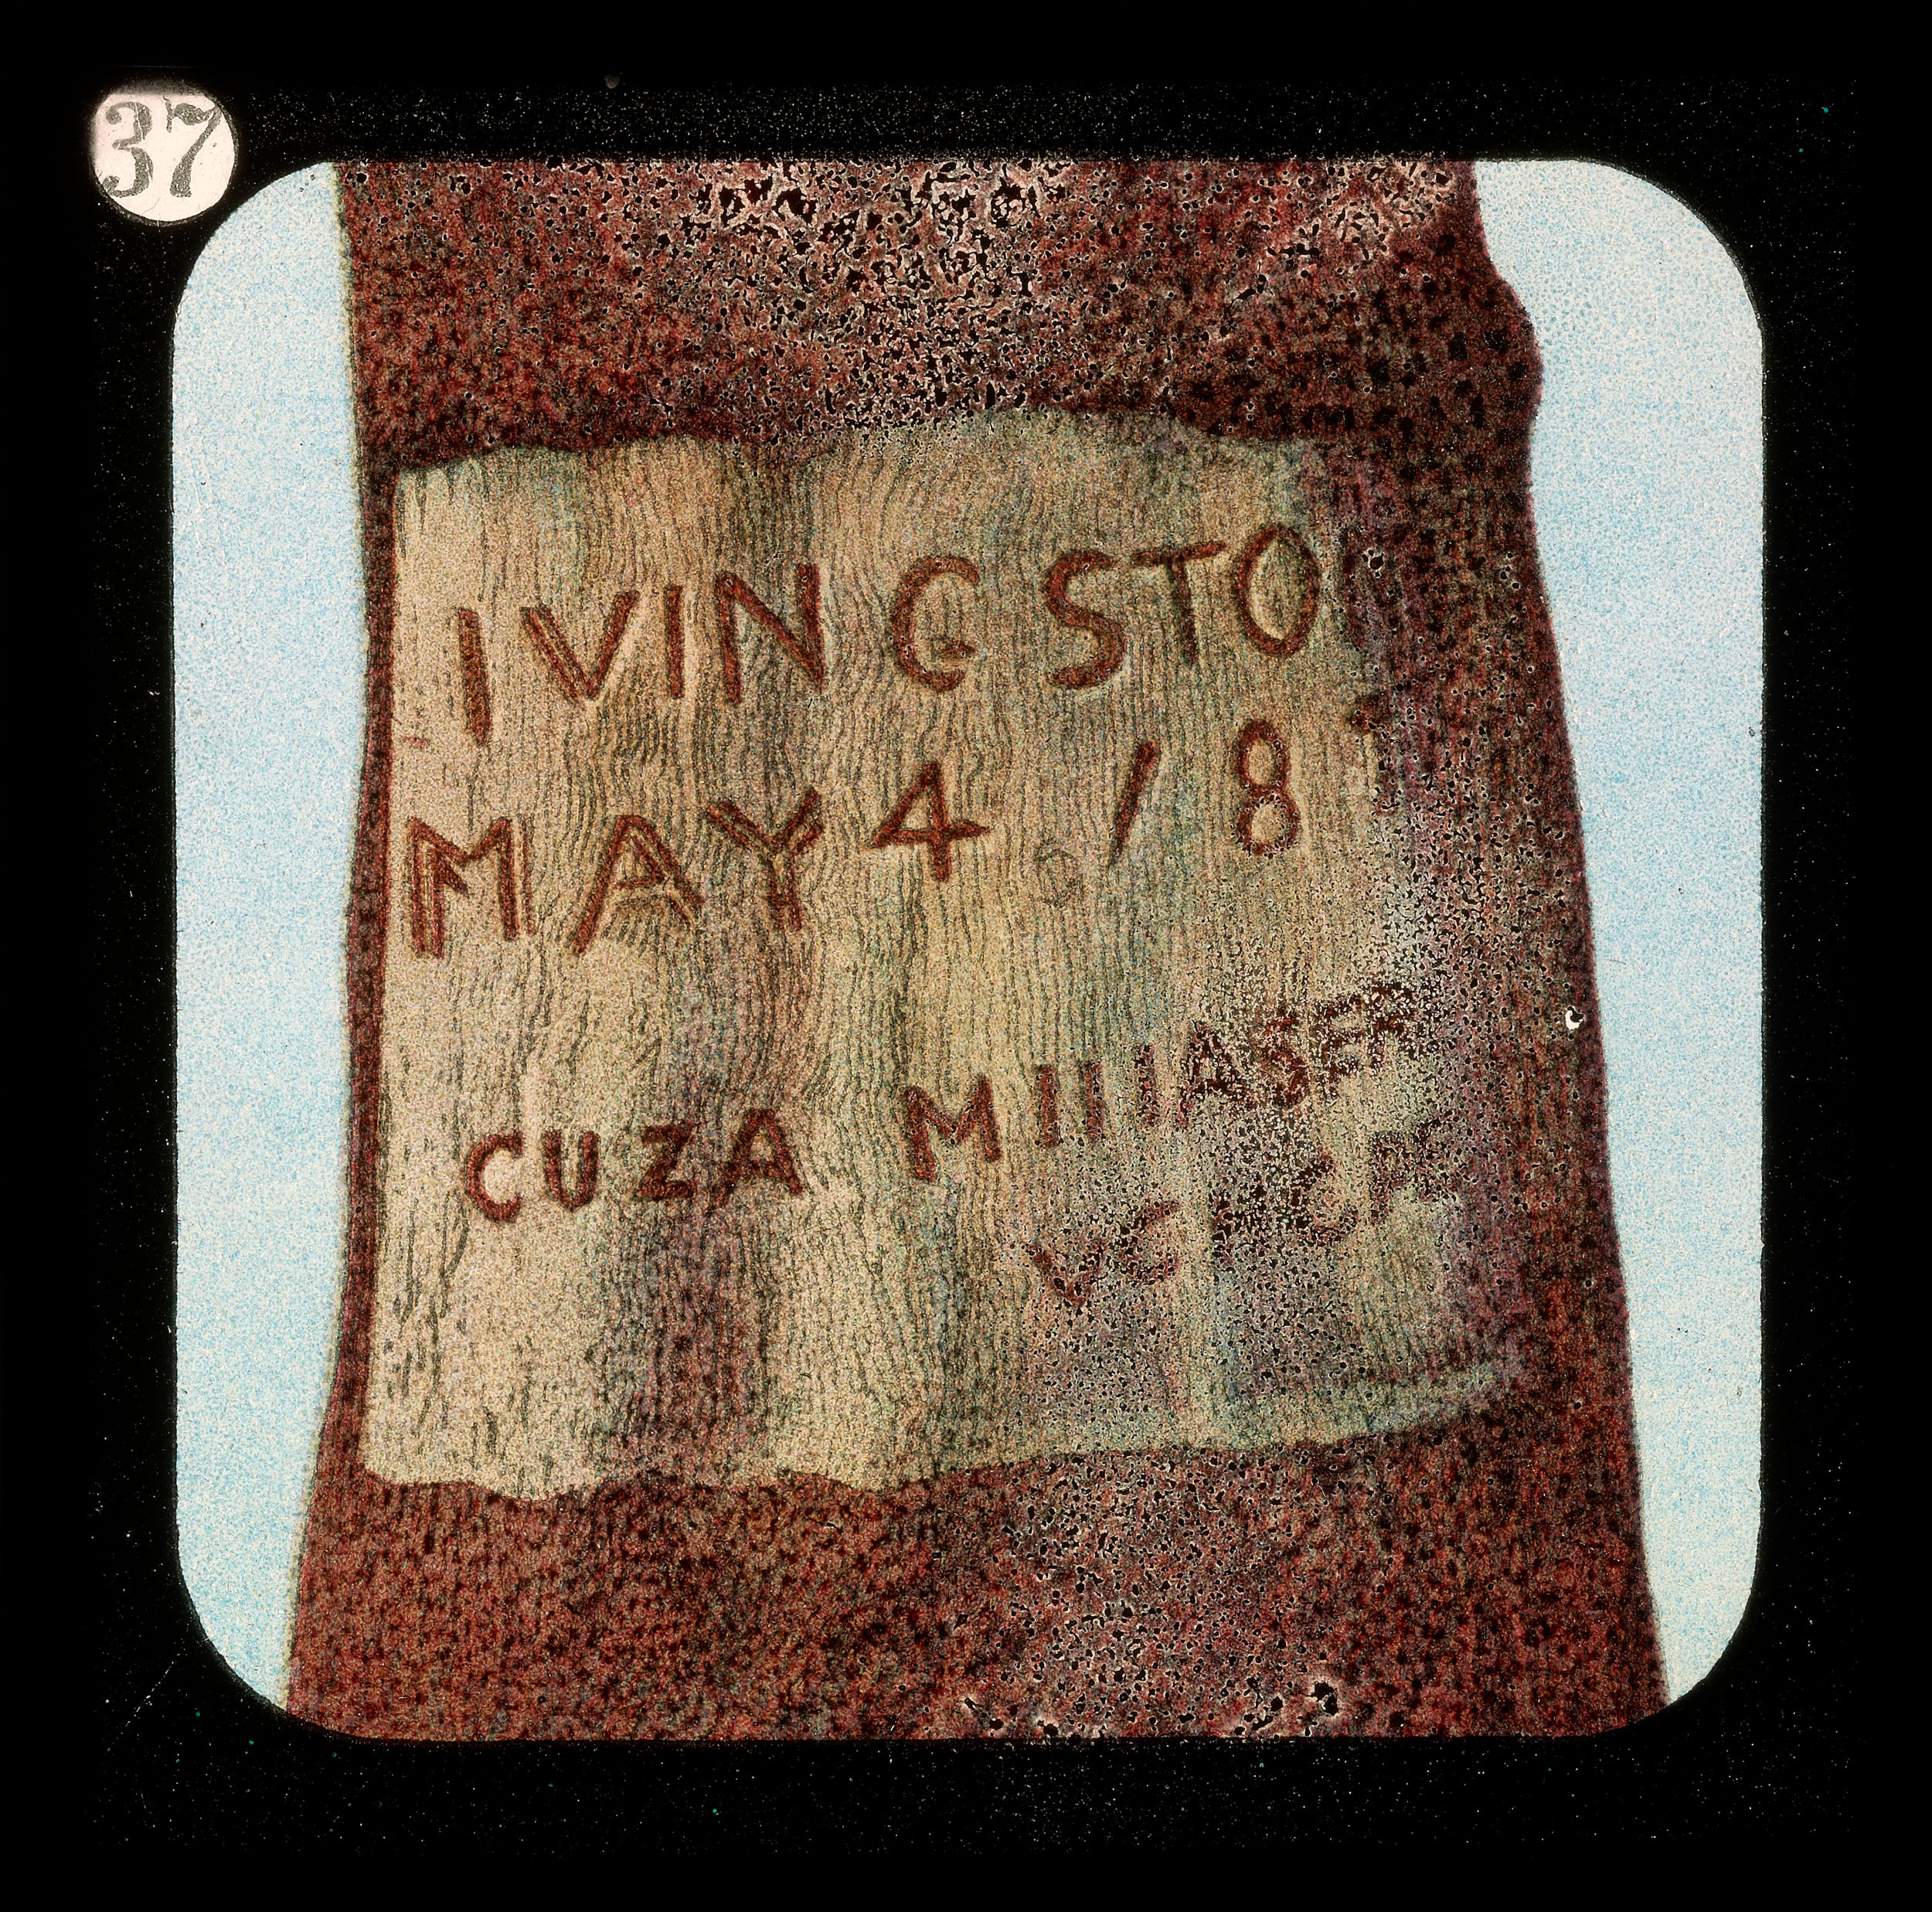 Inscription on Tree Where David Livingstone's Heart Is Buried. Lantern Slide from the Life, Adventures, and Work of David Livingstone (Anon. 1900: [37]). Image courtesy of the Smithsonian Libraries, Washington, D.C.